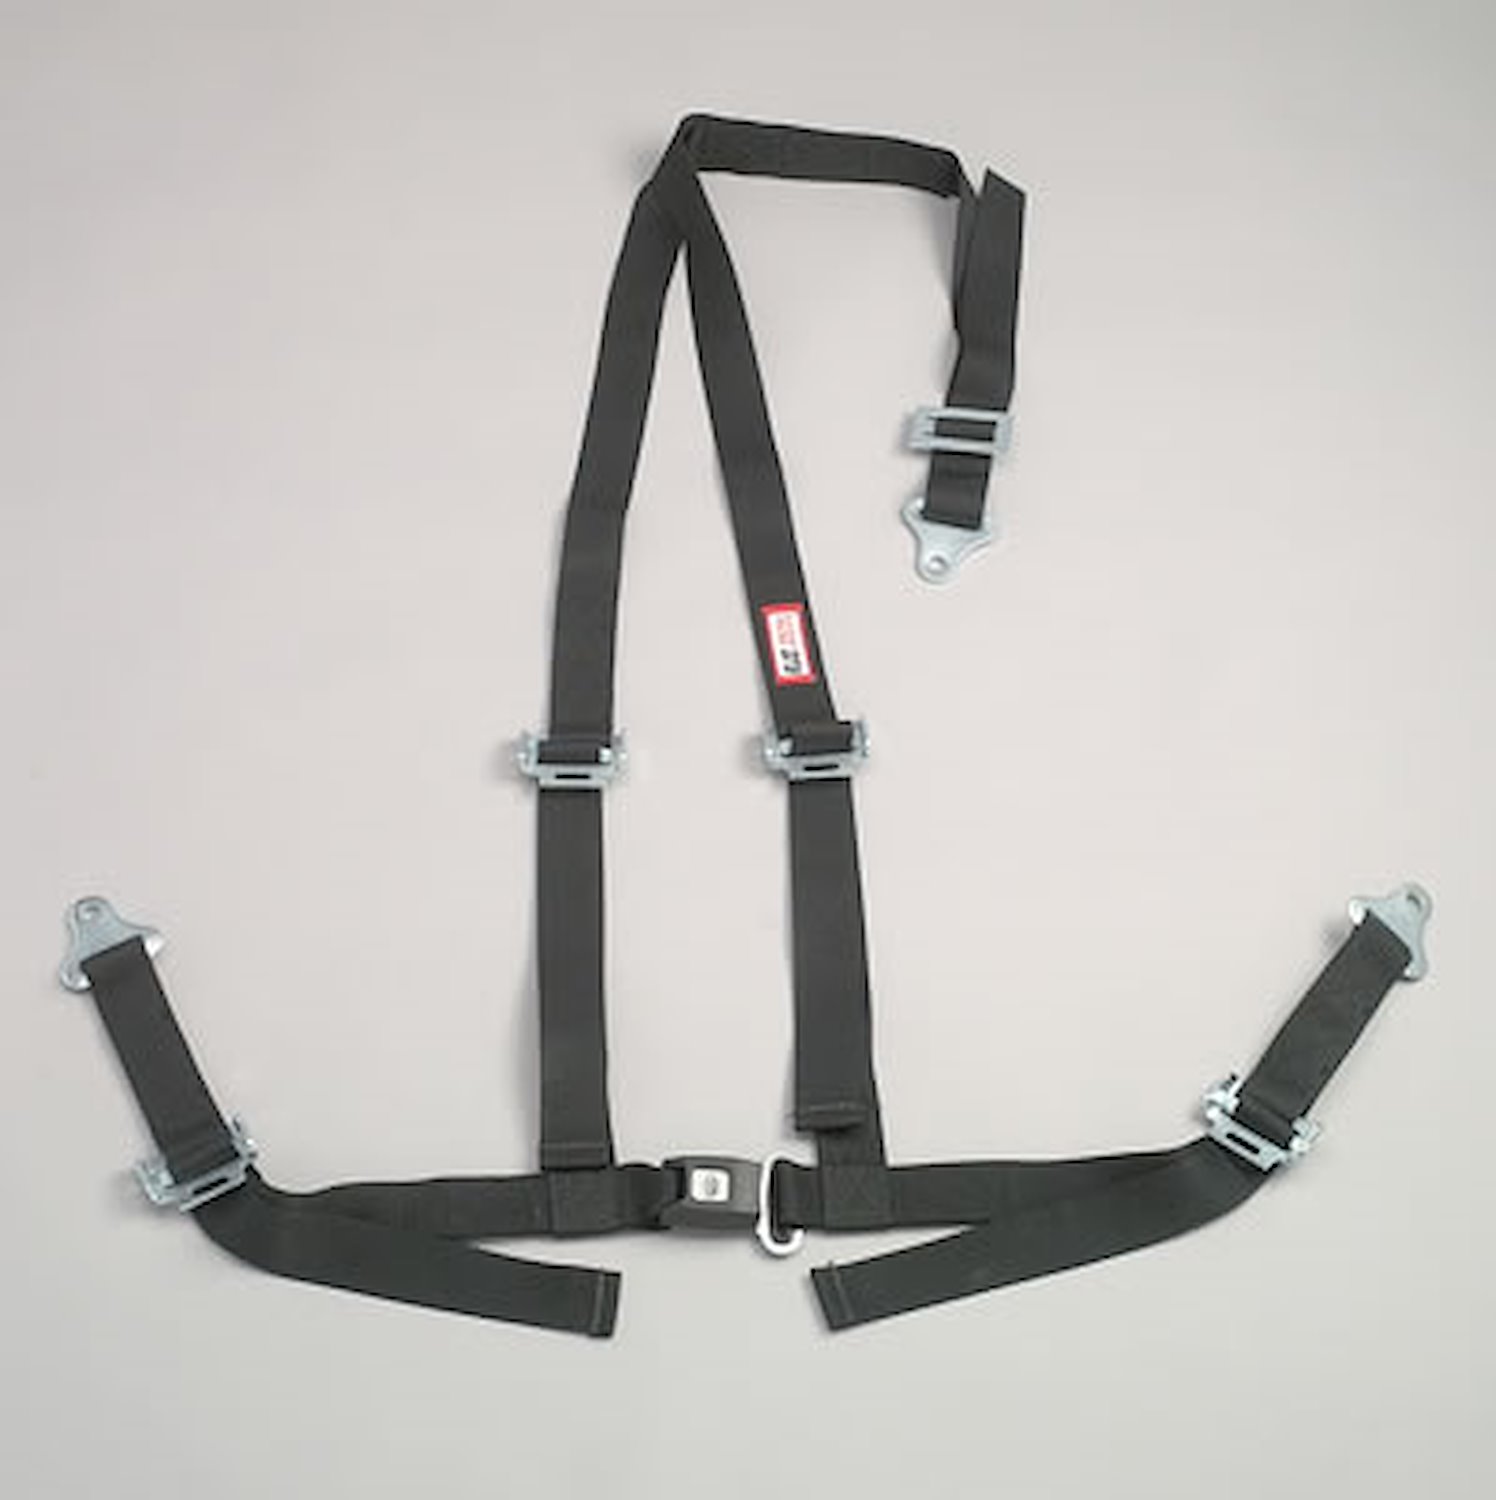 NON-SFI B&T HARNESS 2 PULL UP Lap Belt SNAP 2 S. H. Individual FLOOR Mount WRAP/SNAP w/STERNUM STRAP BLACK